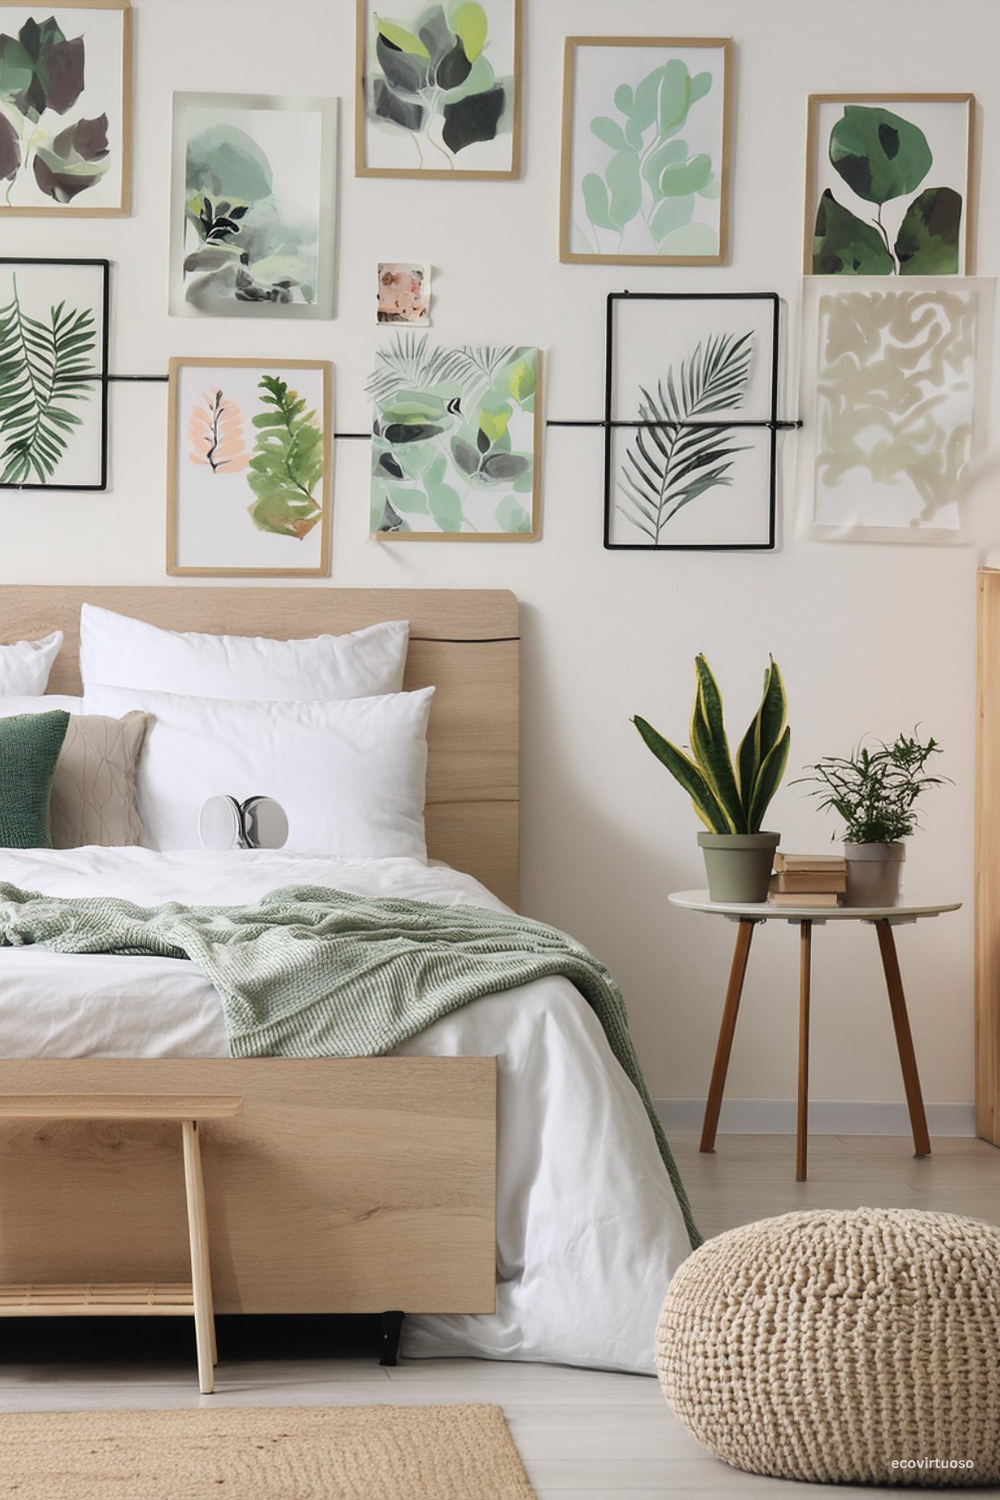 a bed with personalized photos and artwork